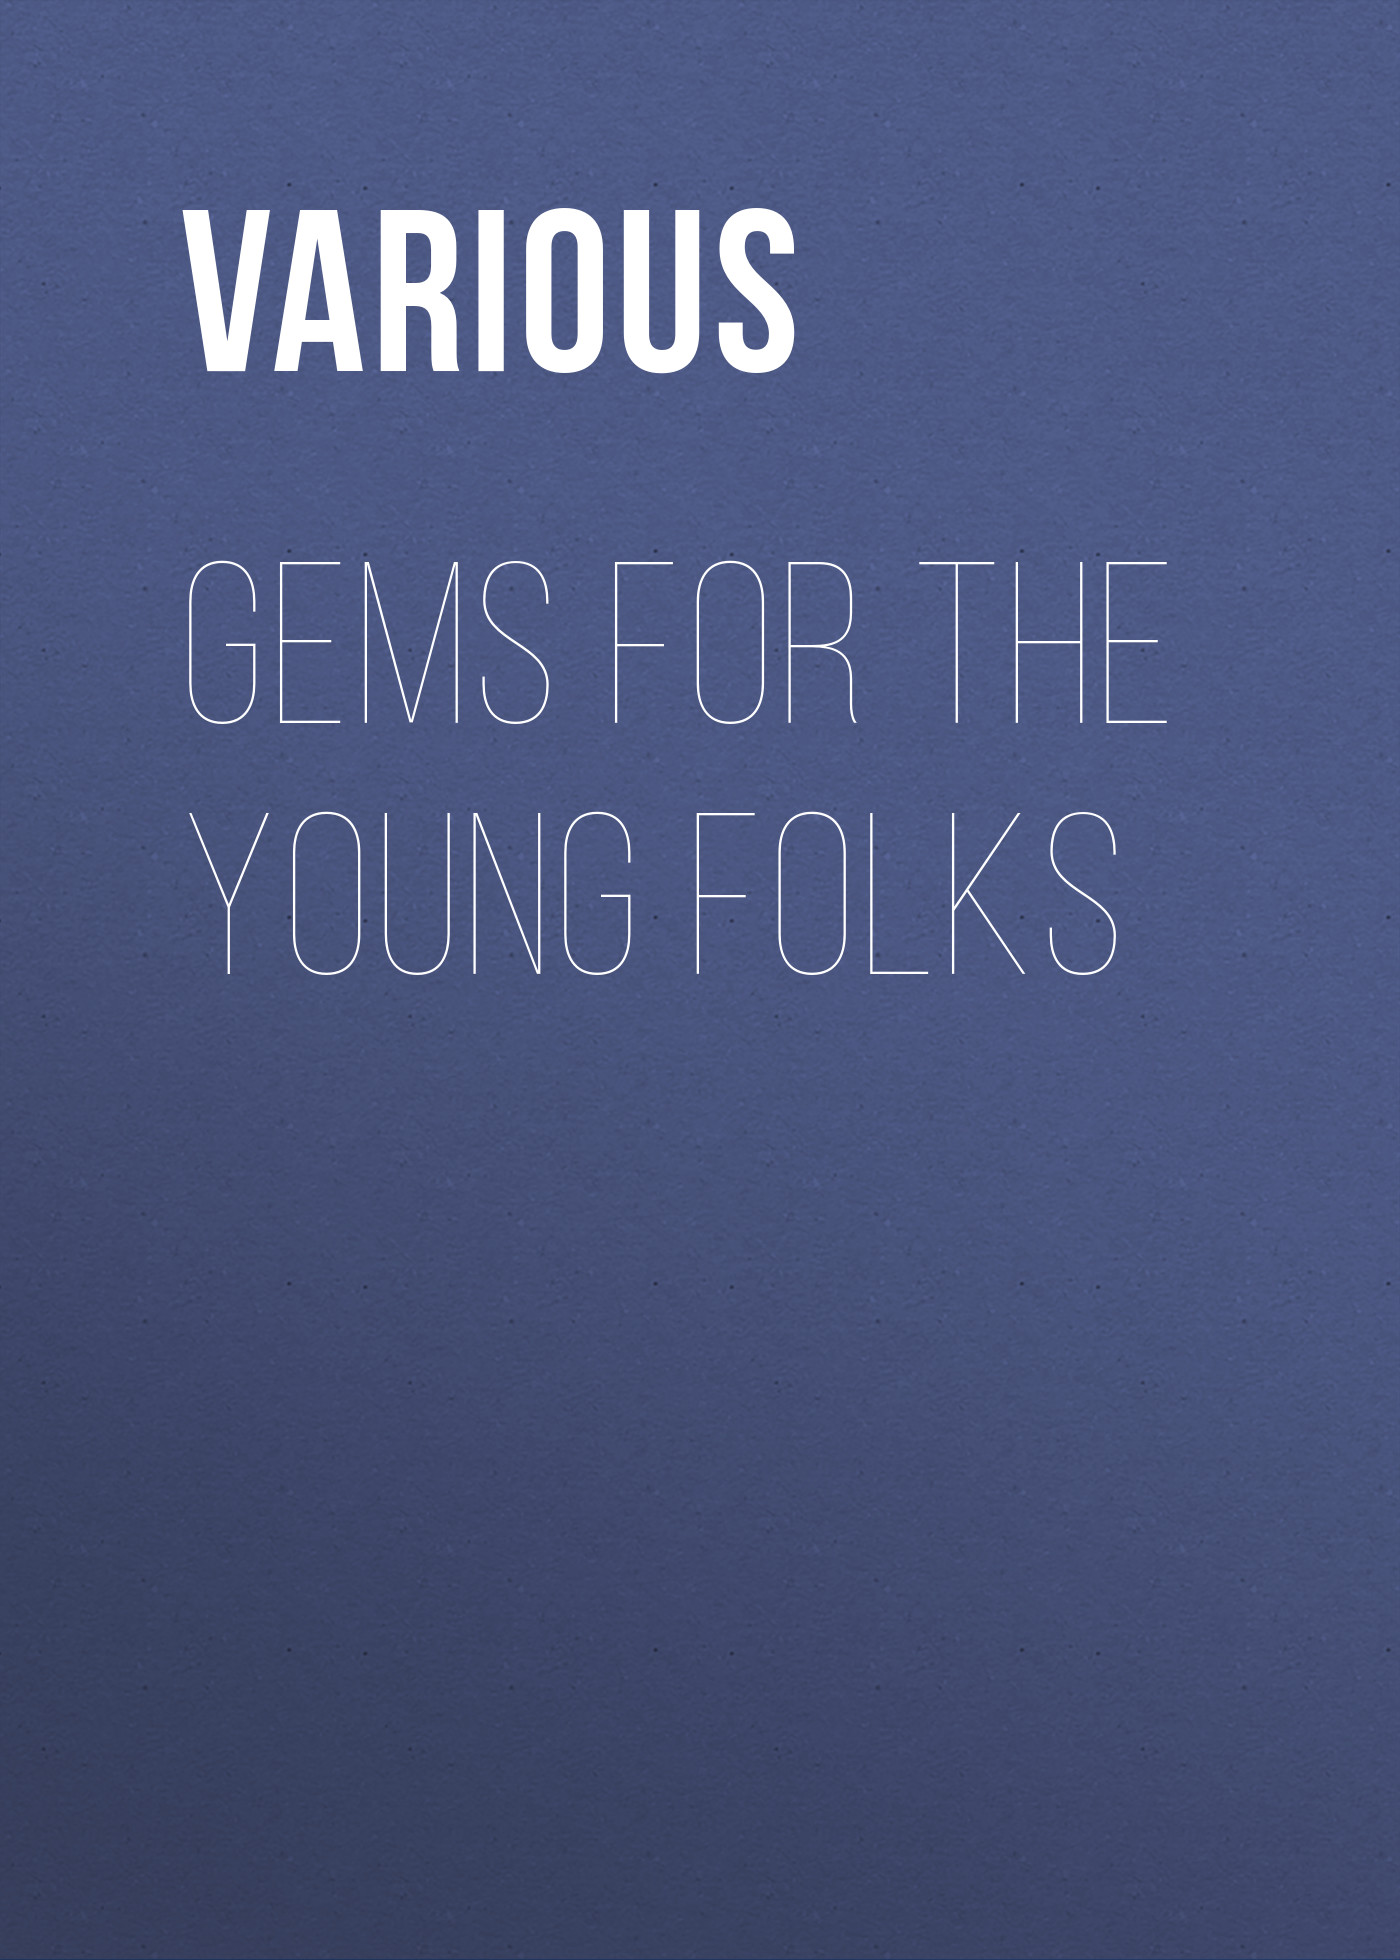 Various Gems for the Young Folks